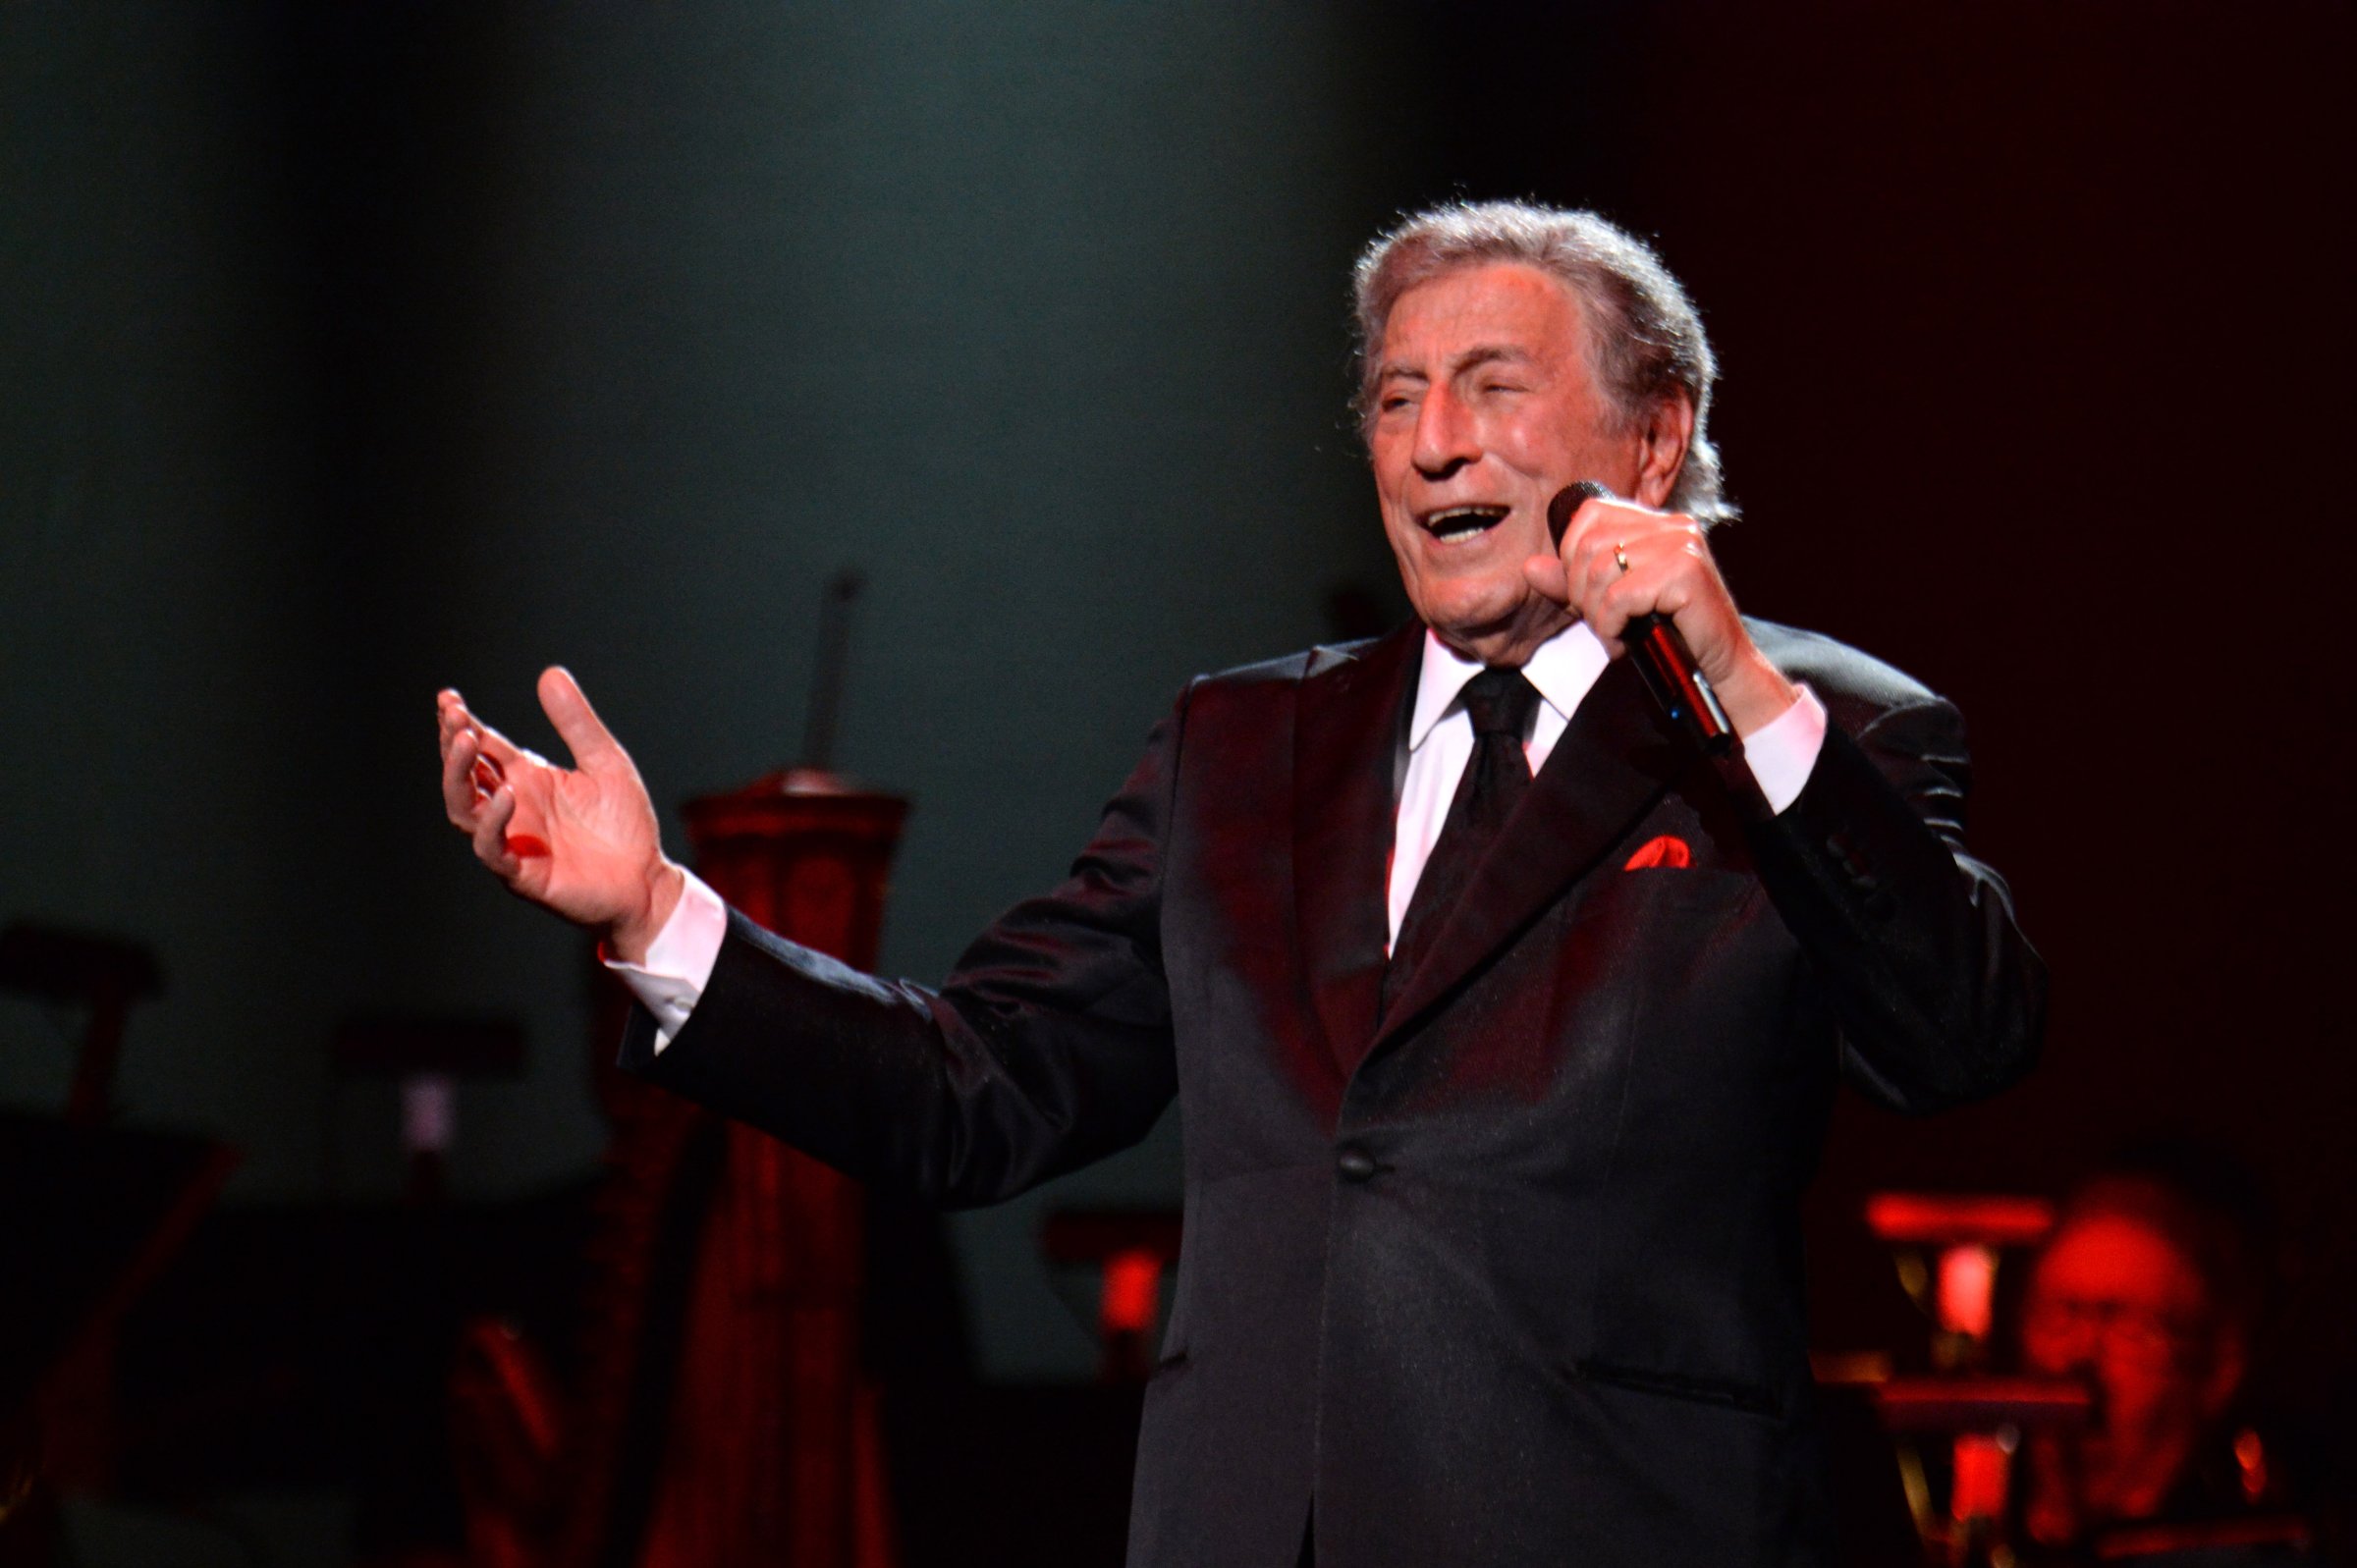 Citi Presents Lady Gaga and Tony Bennett Performing in Support of Their Award Winning Album "Cheek to Cheek"